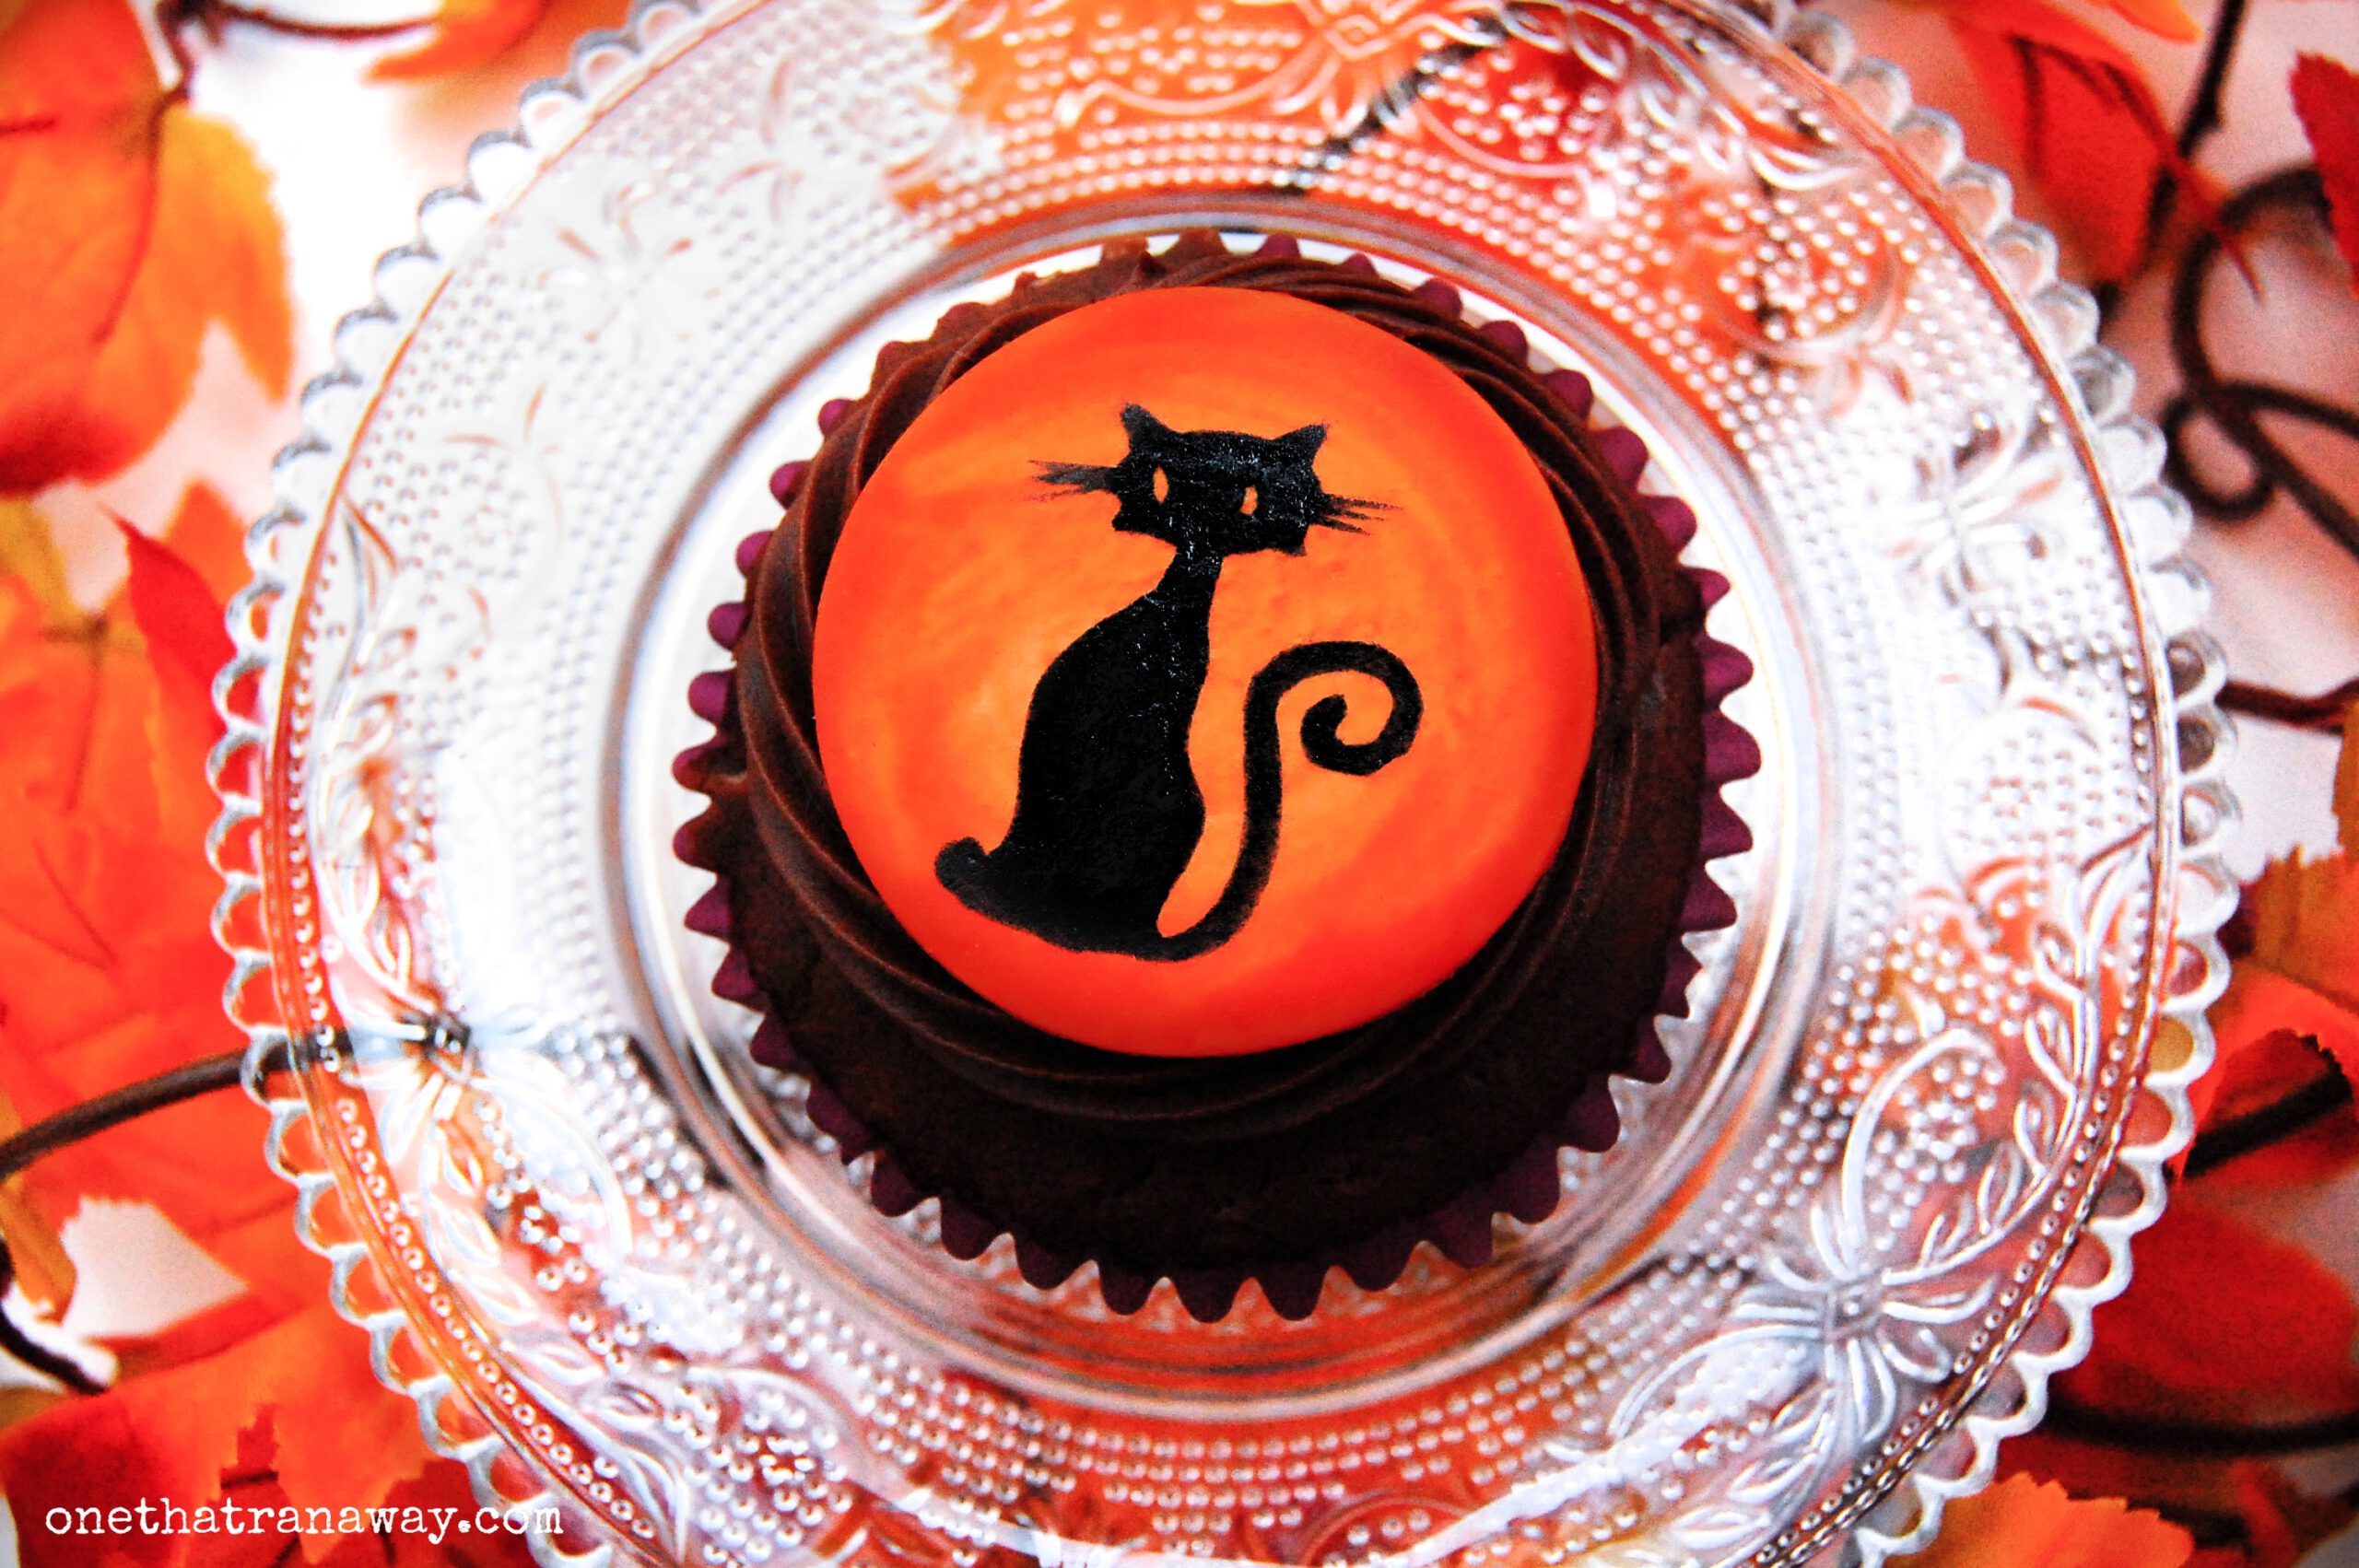 chocolate cupcake with an orange fondant topper showing the silhouette of a cat